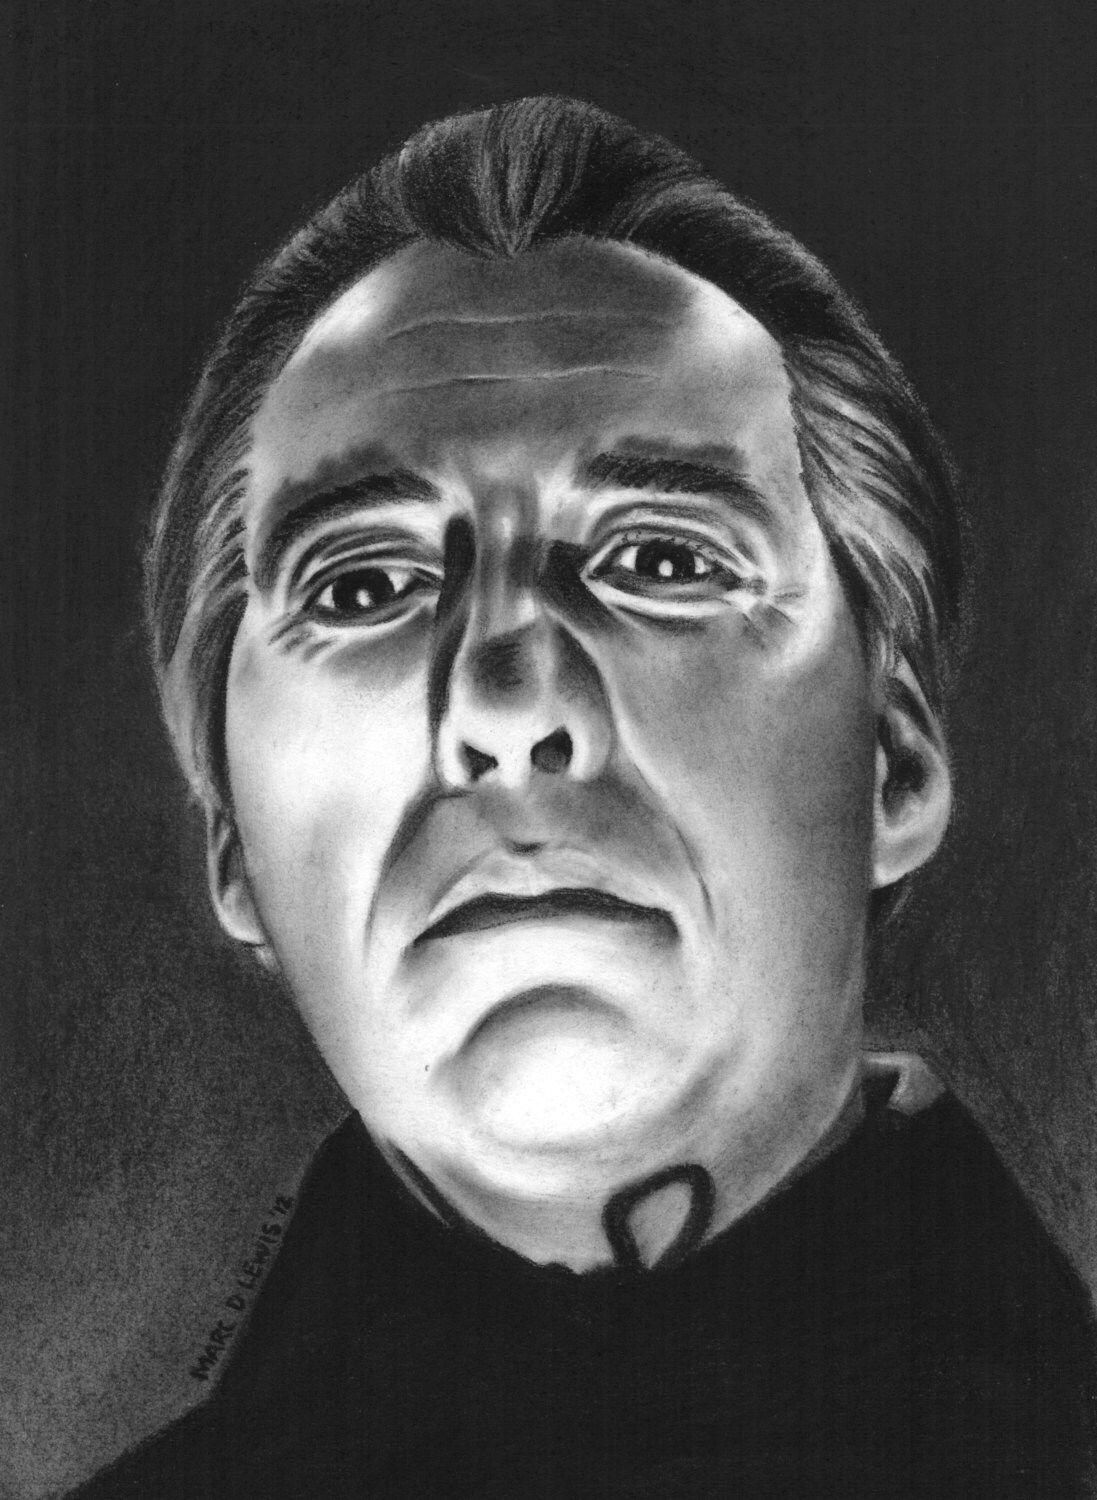 COUNT DRACULA ART Original Portrait of by MarcDLewisArt on Etsy